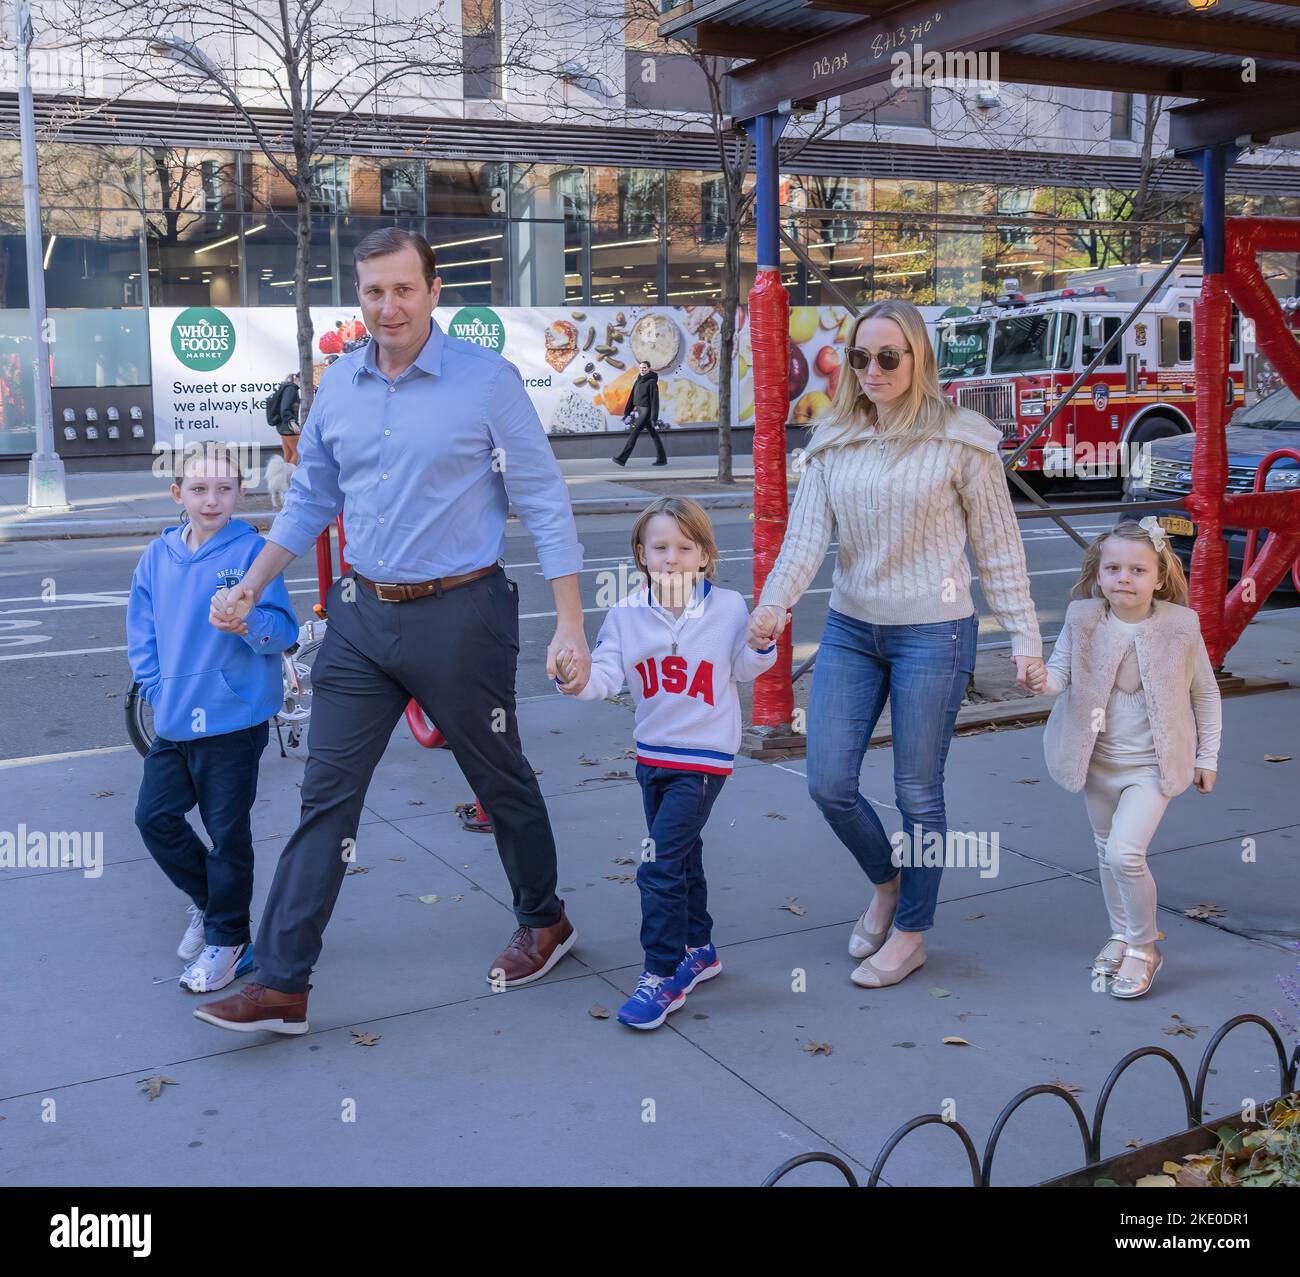 NEW YORK, N.Y. – November 8, 2022: Congressional candidate Dan Goldman arrives at a polling site with his wife Corinne Levy and their children. Stock Photo